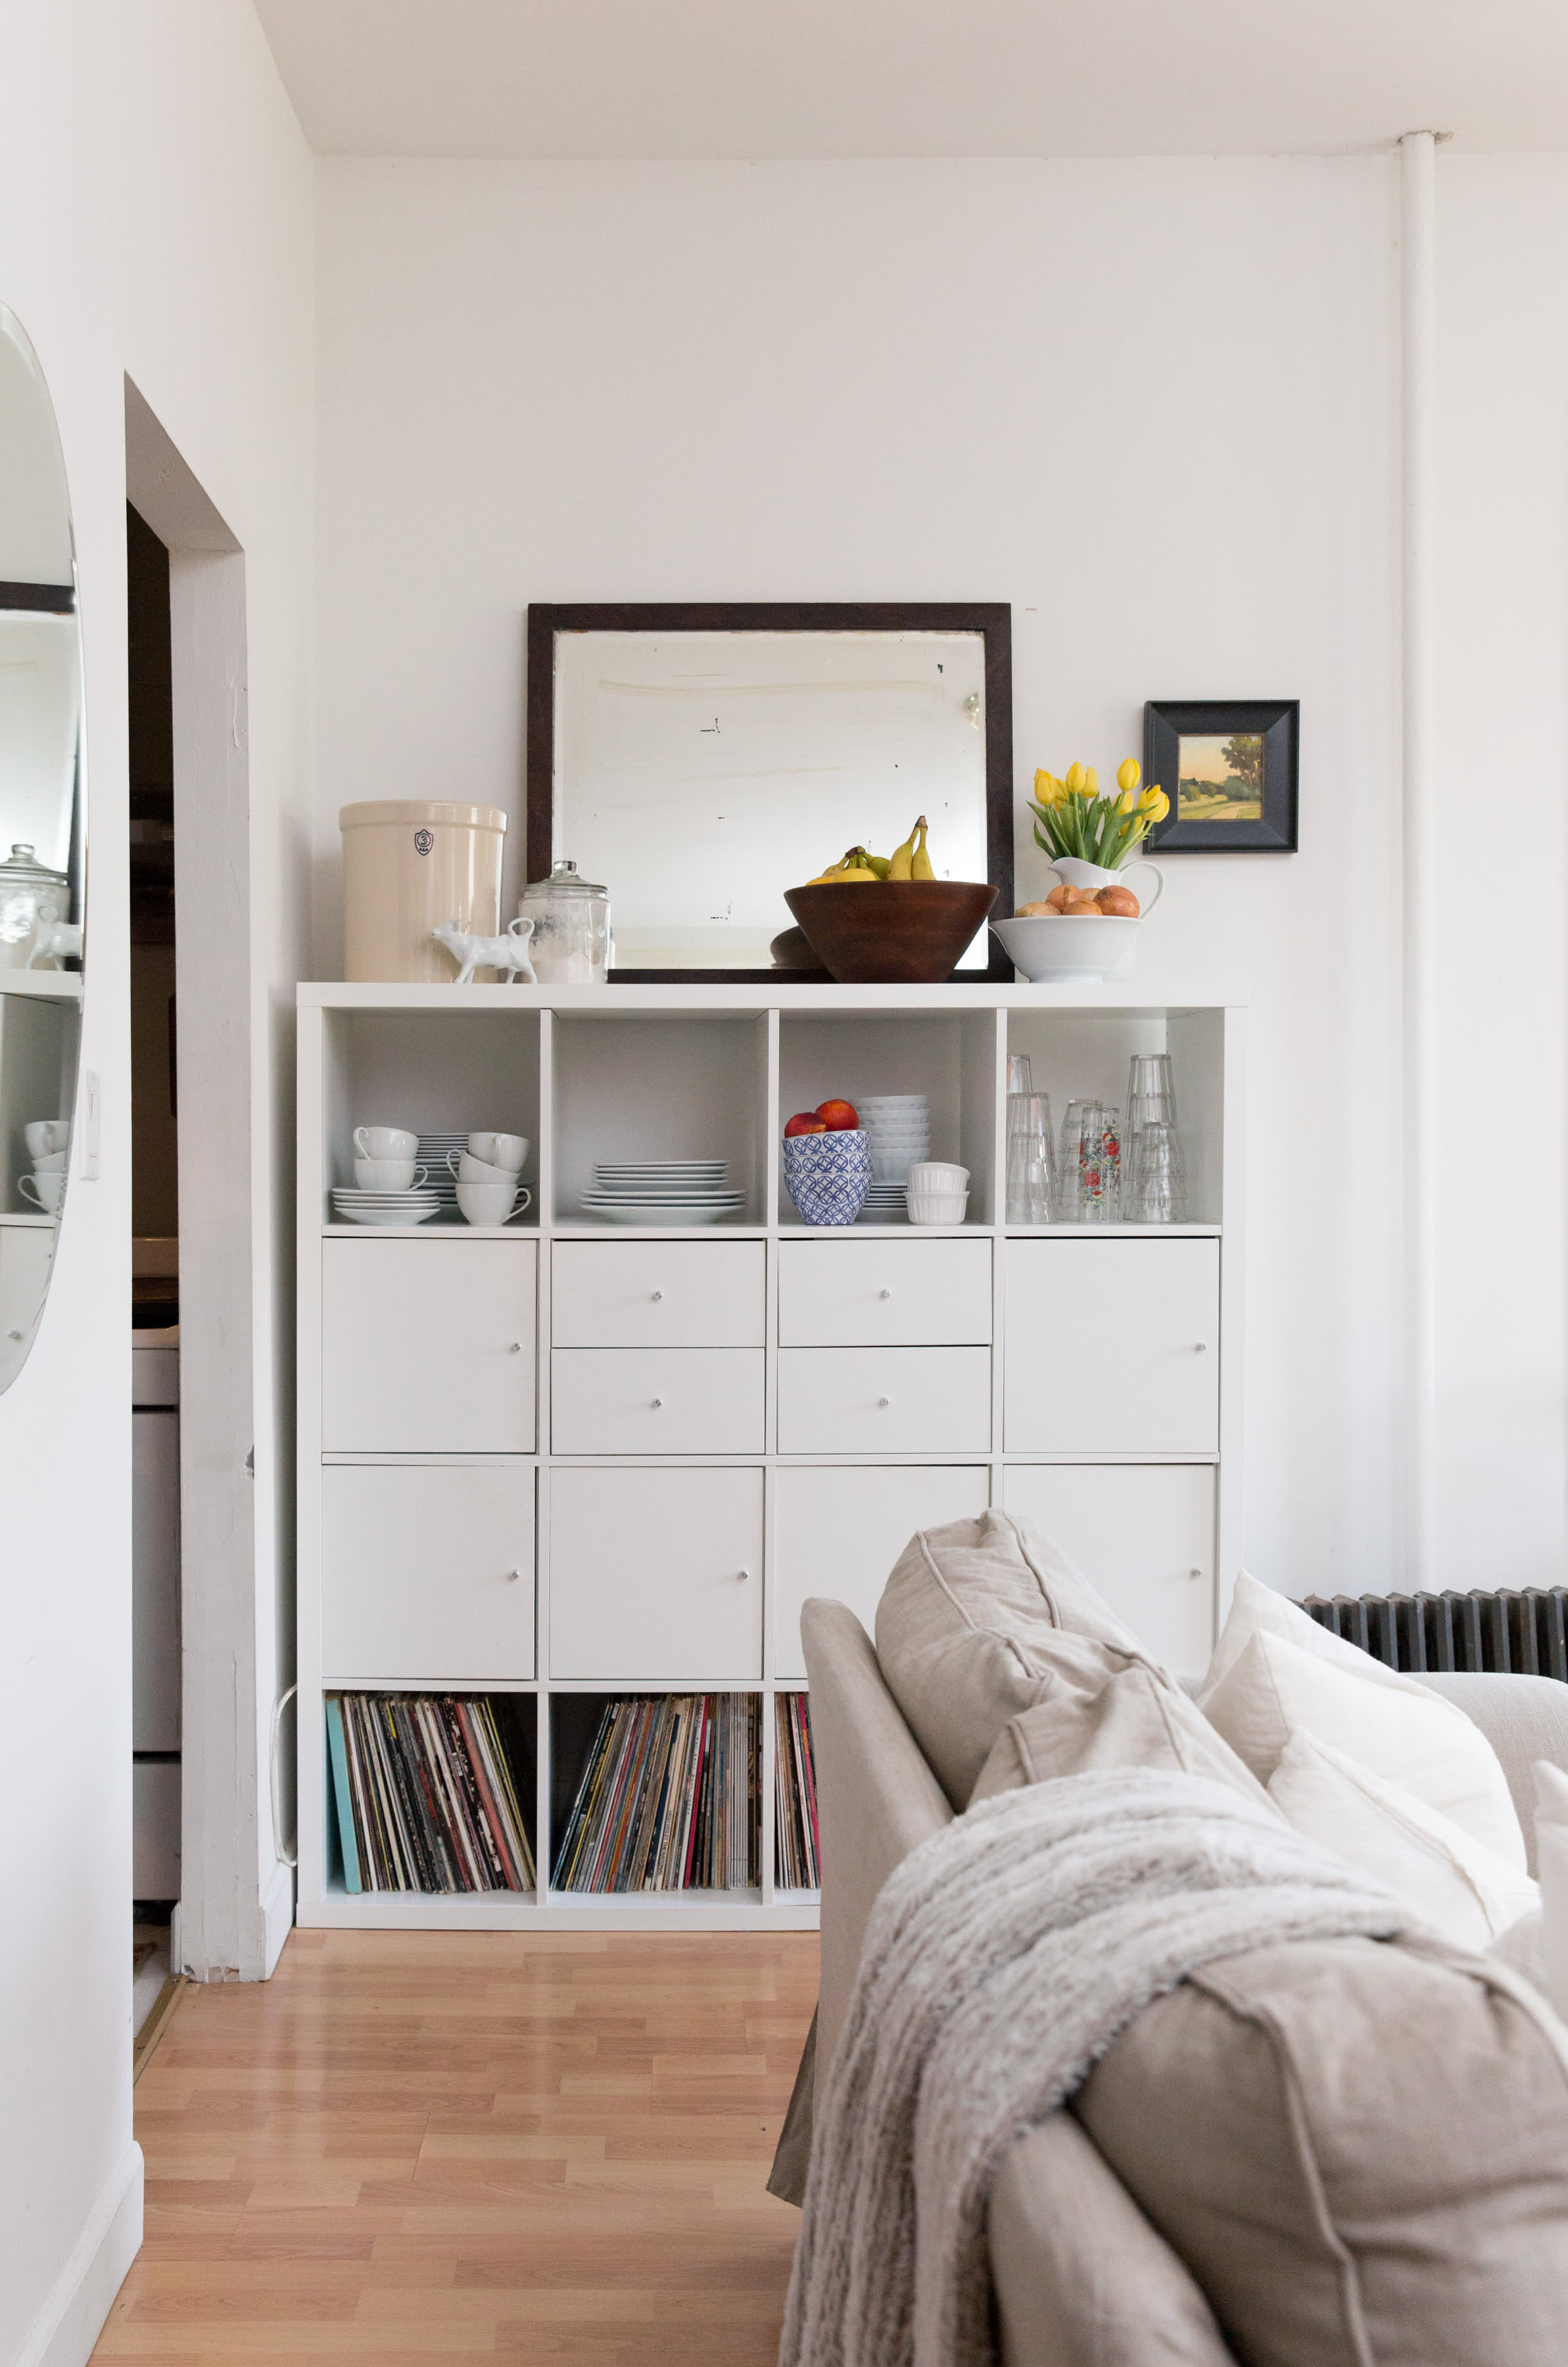 10 Small Space Storage Solutions to Declutter Your Home